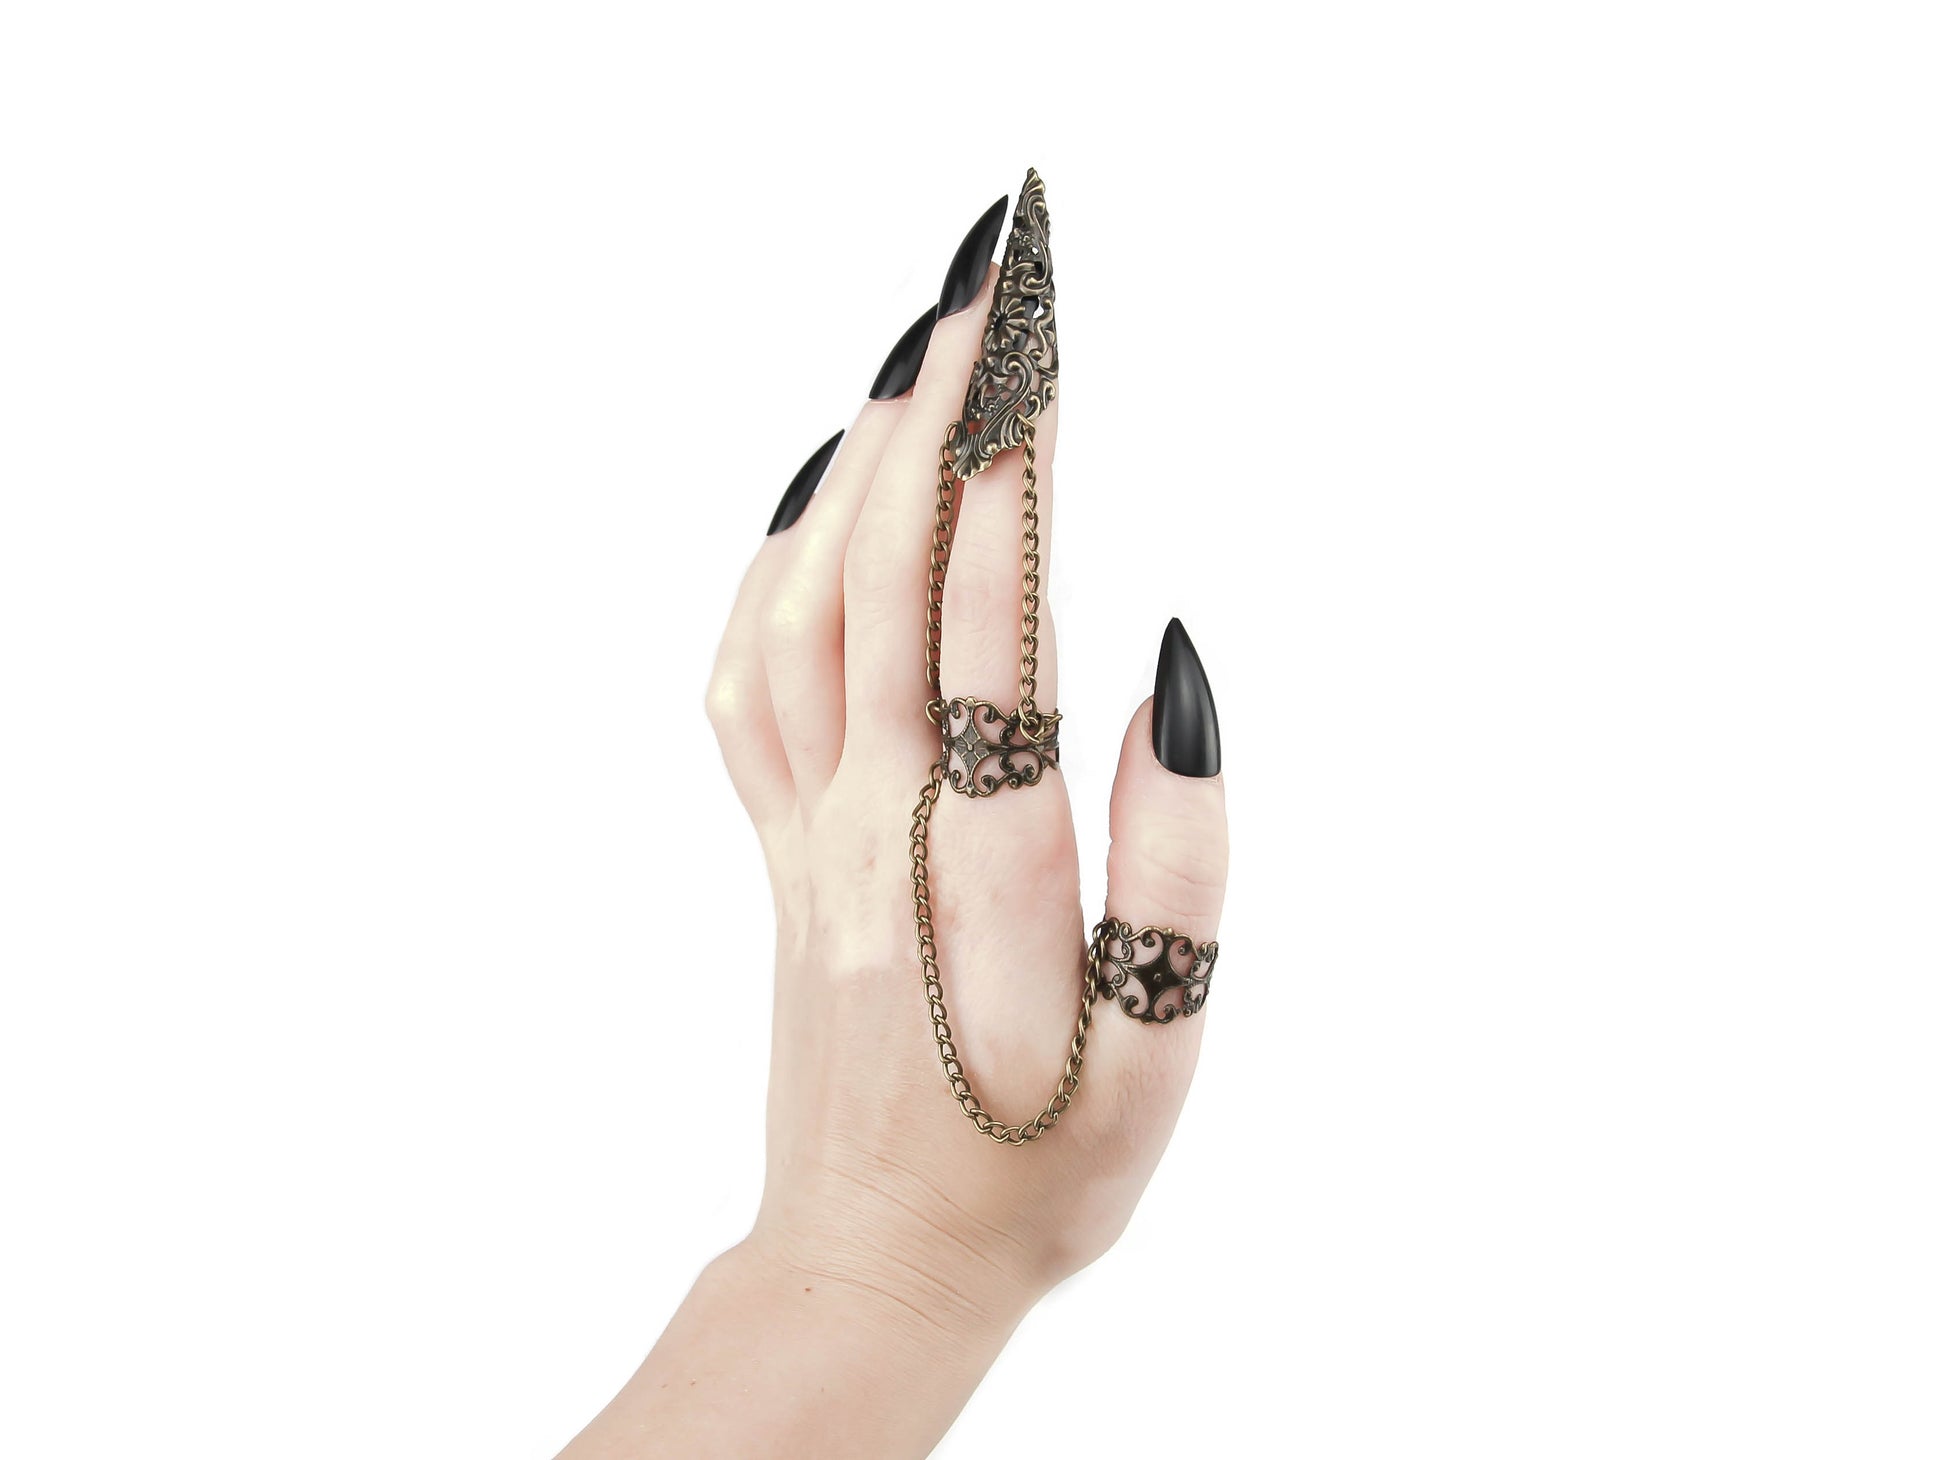 A striking Myril Jewels double ring extends into elegant claws over the fingers, showcasing a detailed bronze filigree design that captures the essence of neo-gothic style. This bold piece is ideal for anyone who gravitates towards dark, avant-garde fashion, making it a fitting accessory for Halloween, a statement piece for everyday witchcore, or an edgy complement to minimal goth, rave party, or festival jewels.